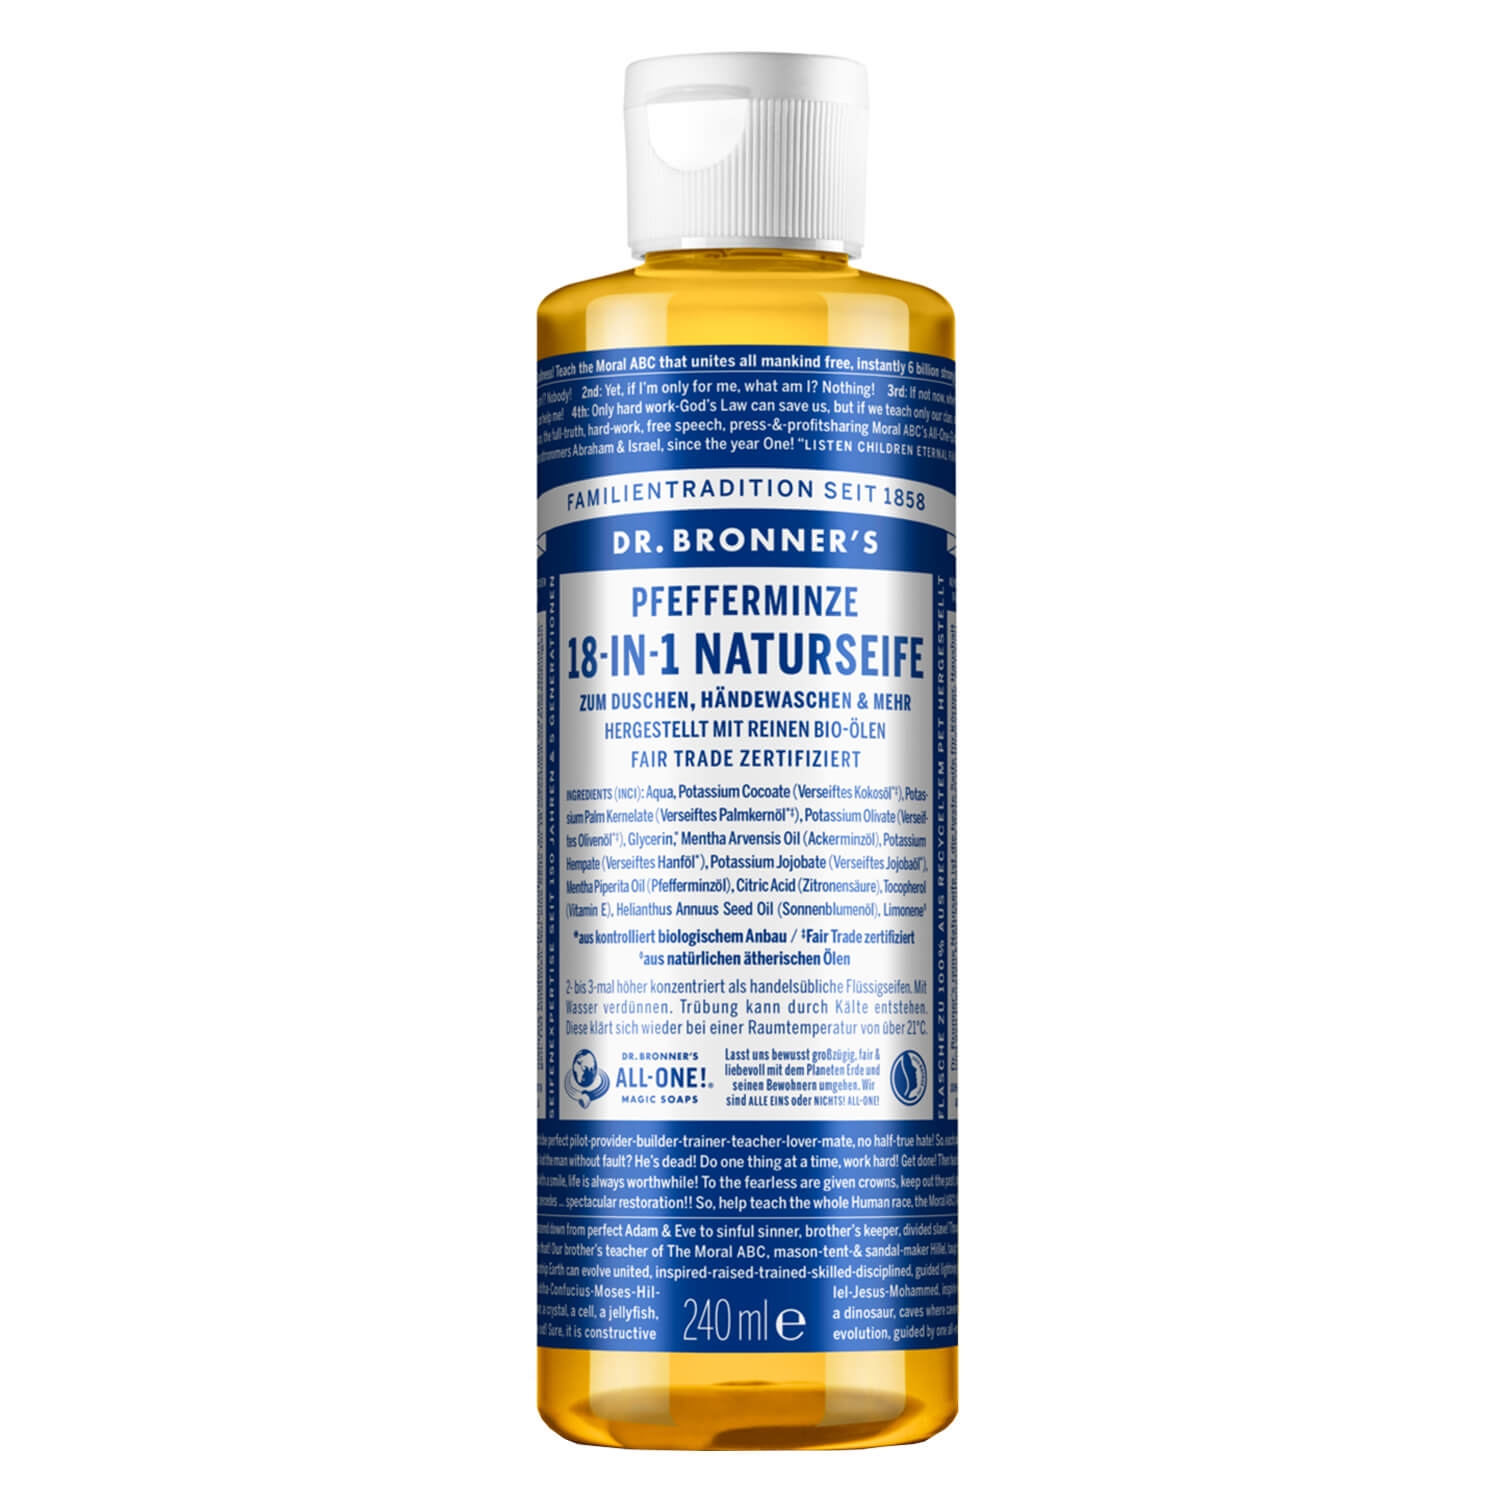 Product image from DR. BRONNER'S - 18-IN-1 Flüssigseife Peppermint